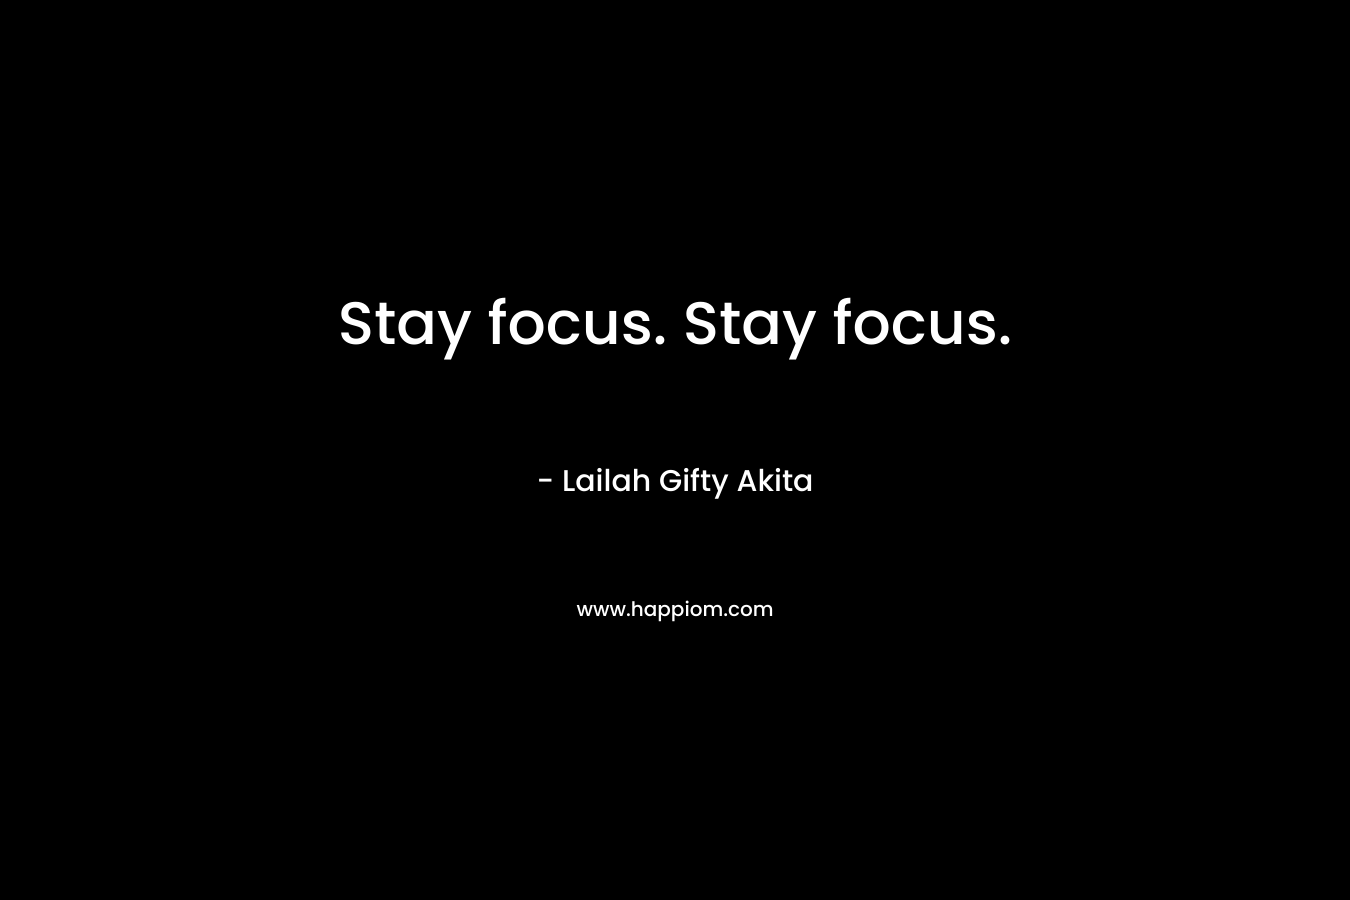 Stay focus. Stay focus.